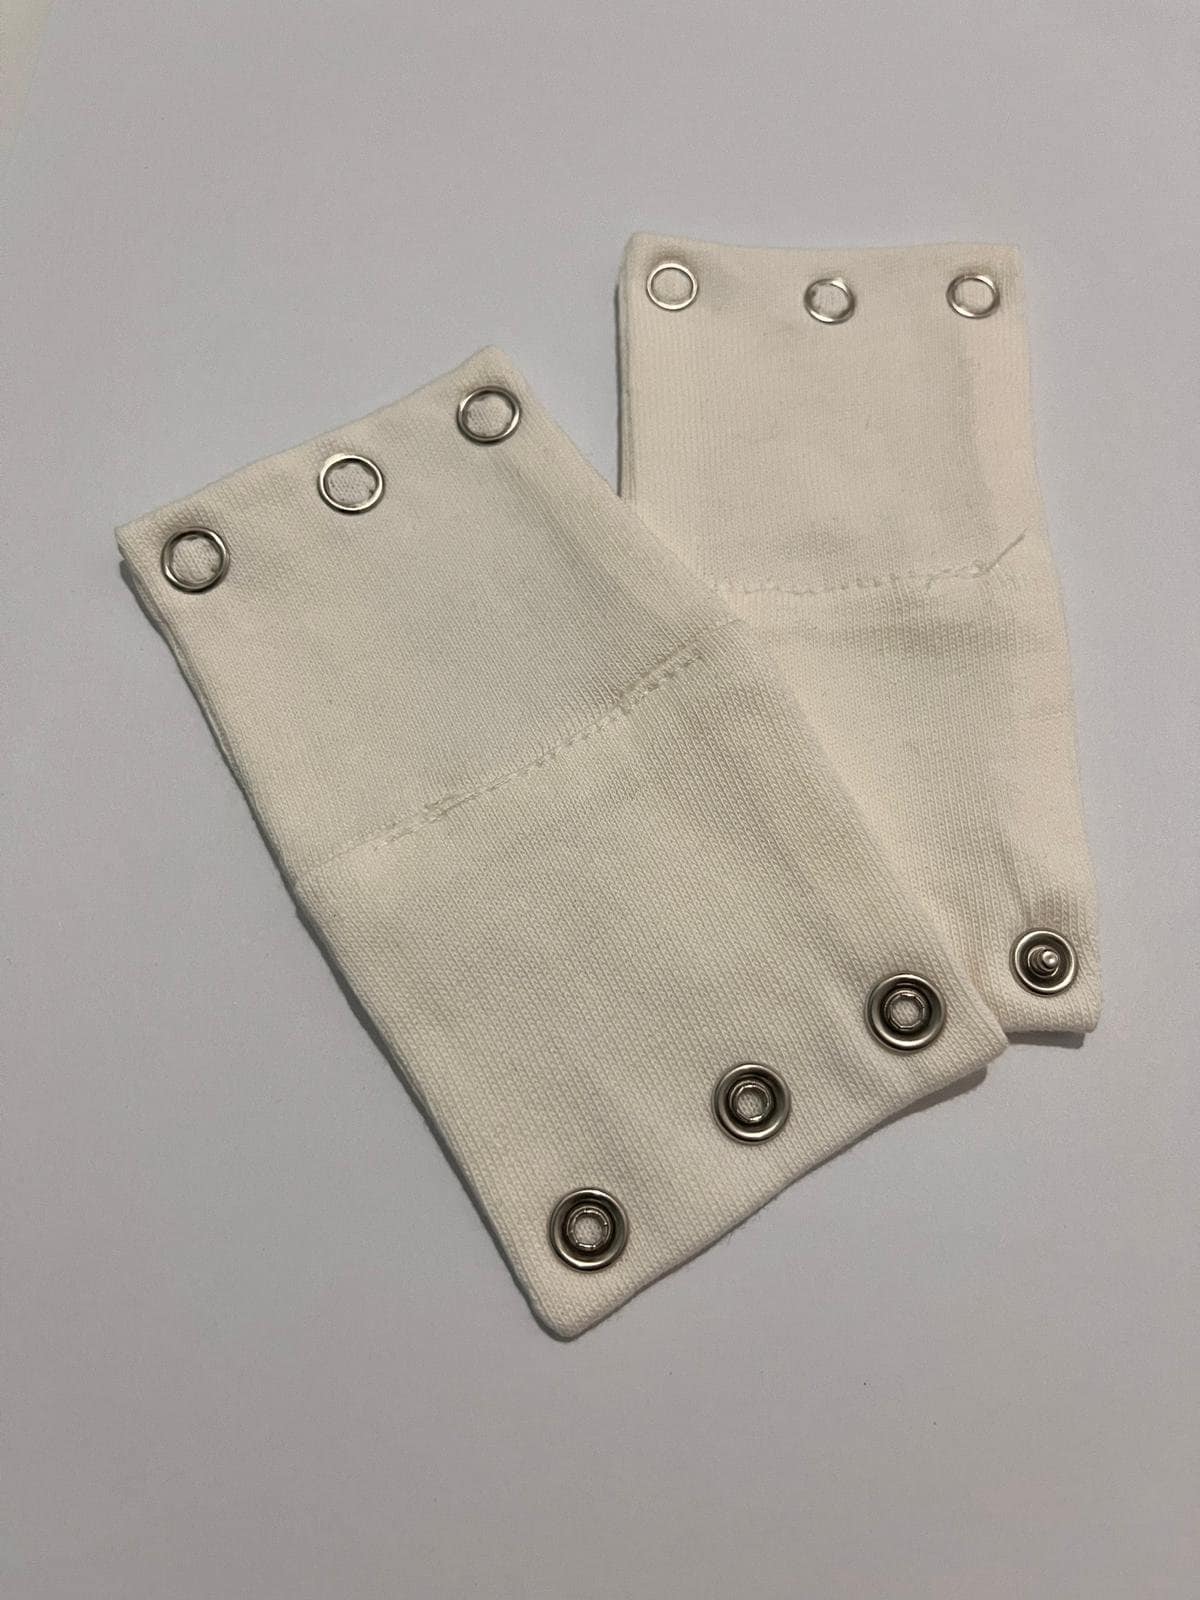 Bodysuit extender, custom extender, snap on extender 2 Pieces 100% Cotton  Body Extension Apparatus 3 Snaps 8.5 and 9.5 mm